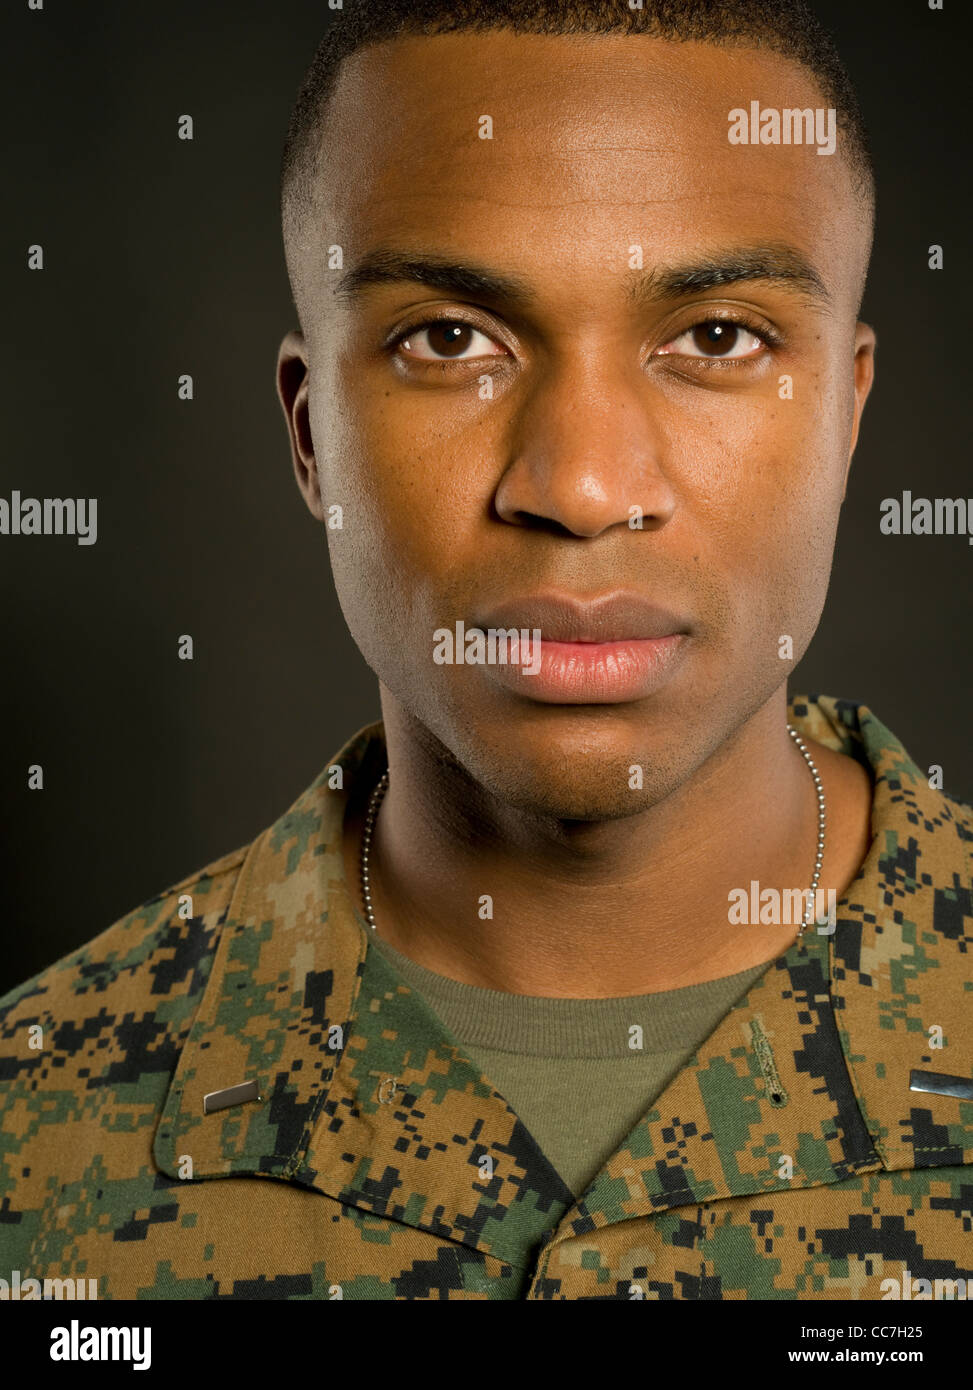 United States Marine Corps Officer in MARPAT digital camouflage uniform and camo  face paint Stock Photo - Alamy